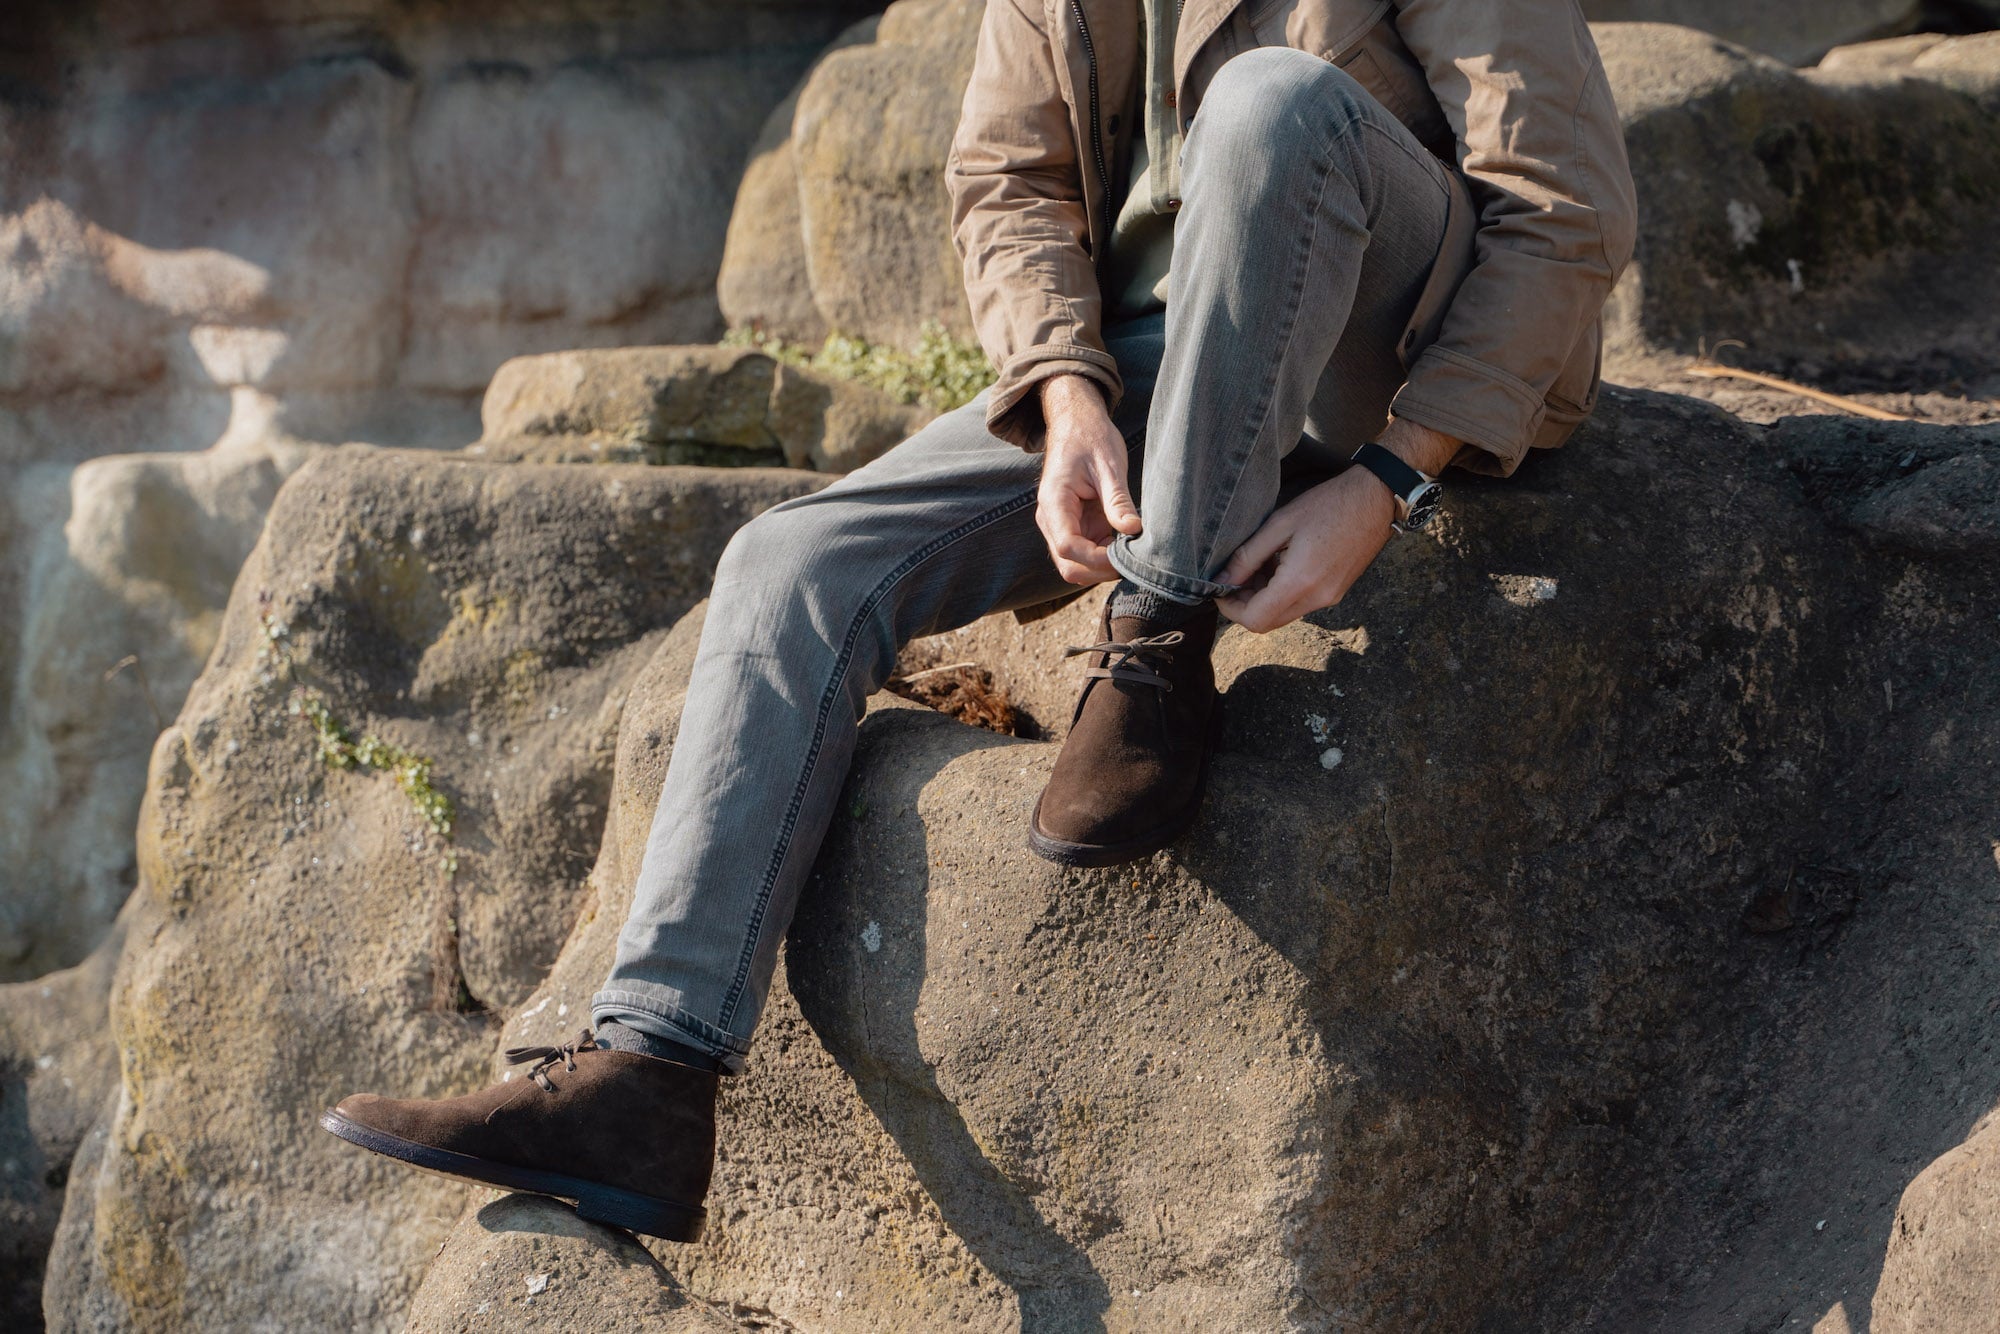 Desert Boot Sizing: Finding The Correct Fit